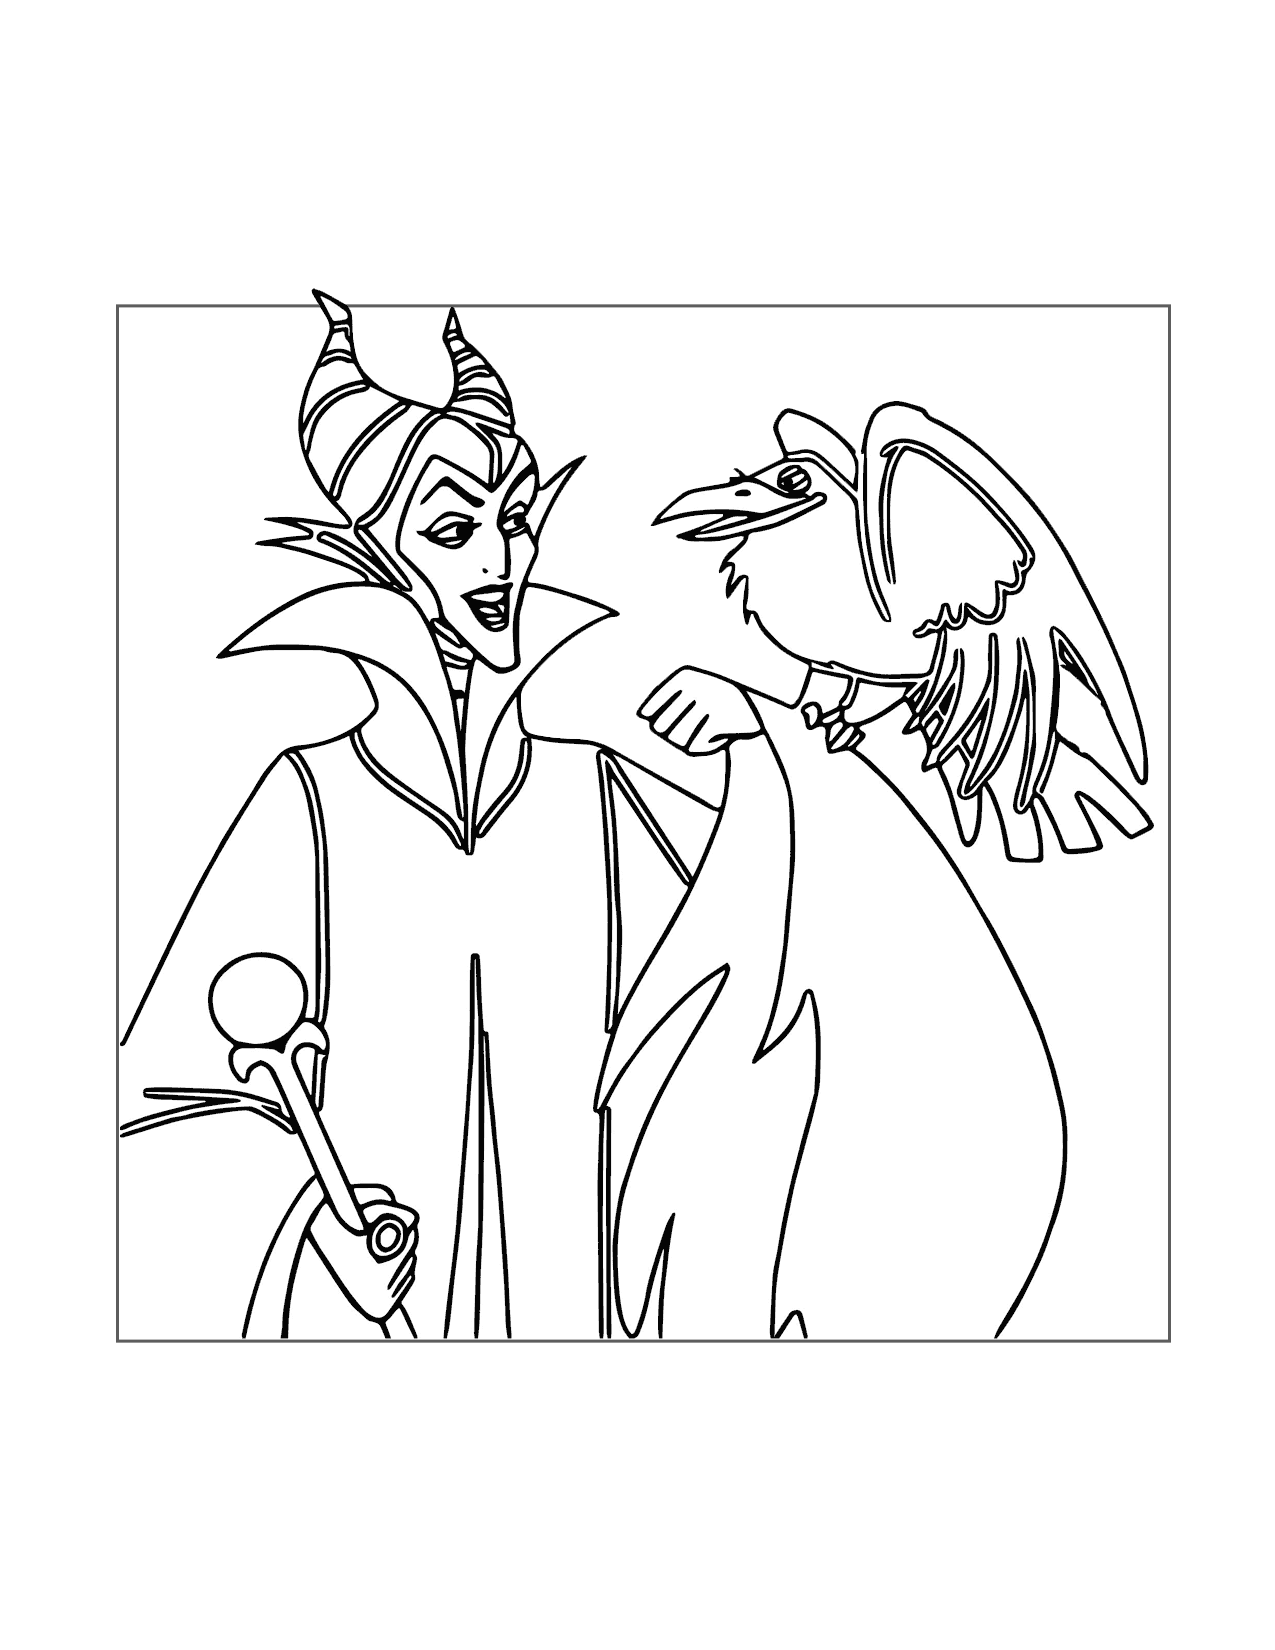 Maleficent And Diablo Coloring Page